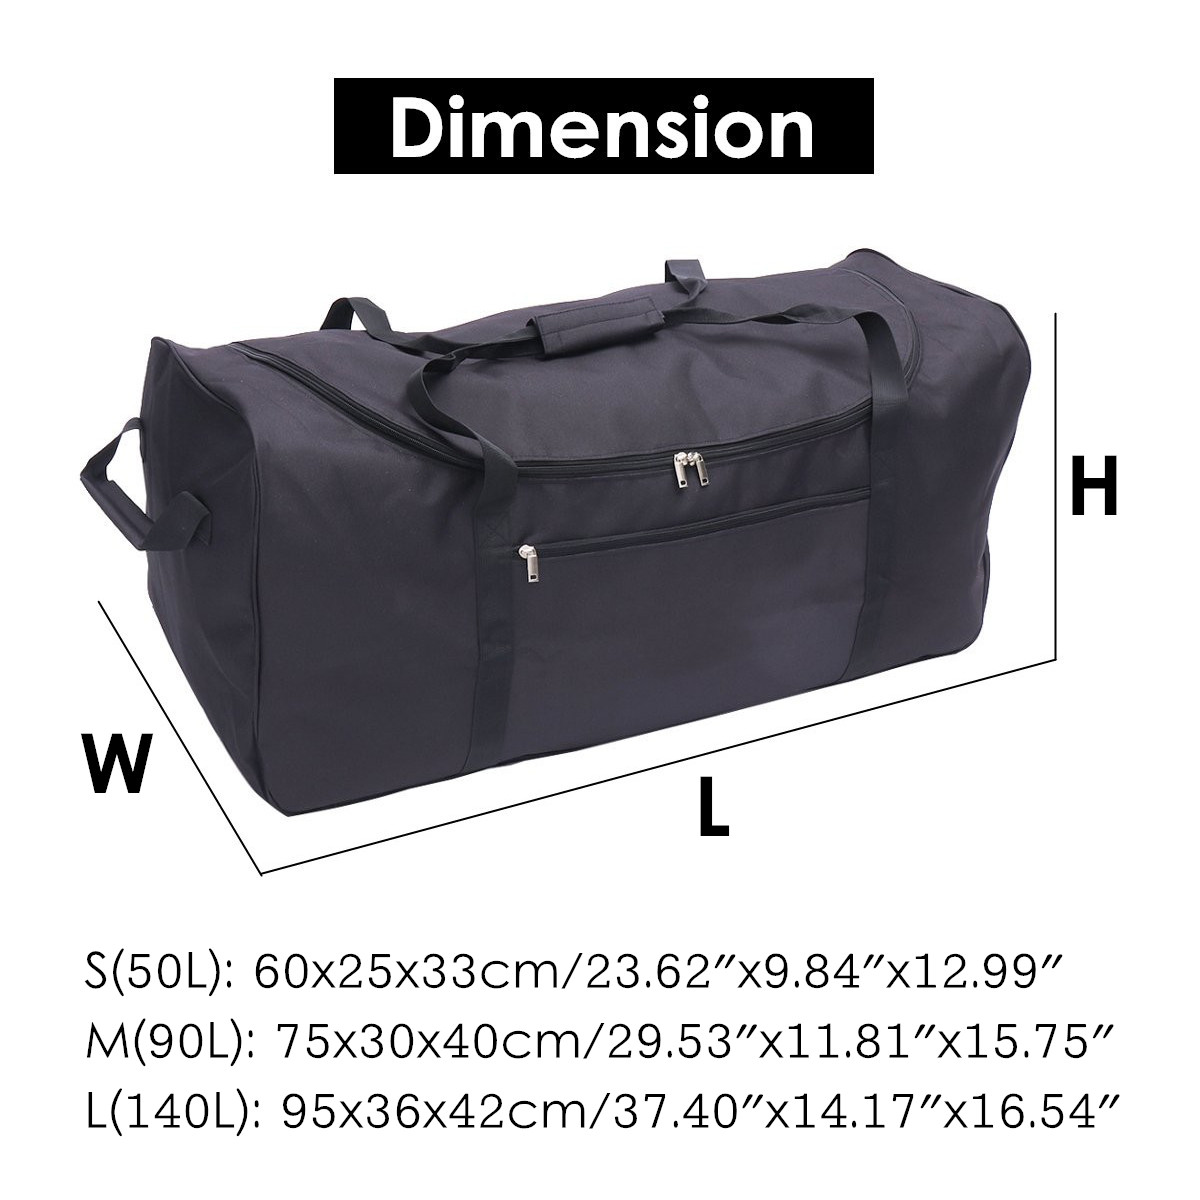 Waterproof-Black-Oxford-Cloth-Large-Capacity-Bag-Foldable-Backpack-Outdoor-Sports-Travel-Hiking-Fitn-1451556-3